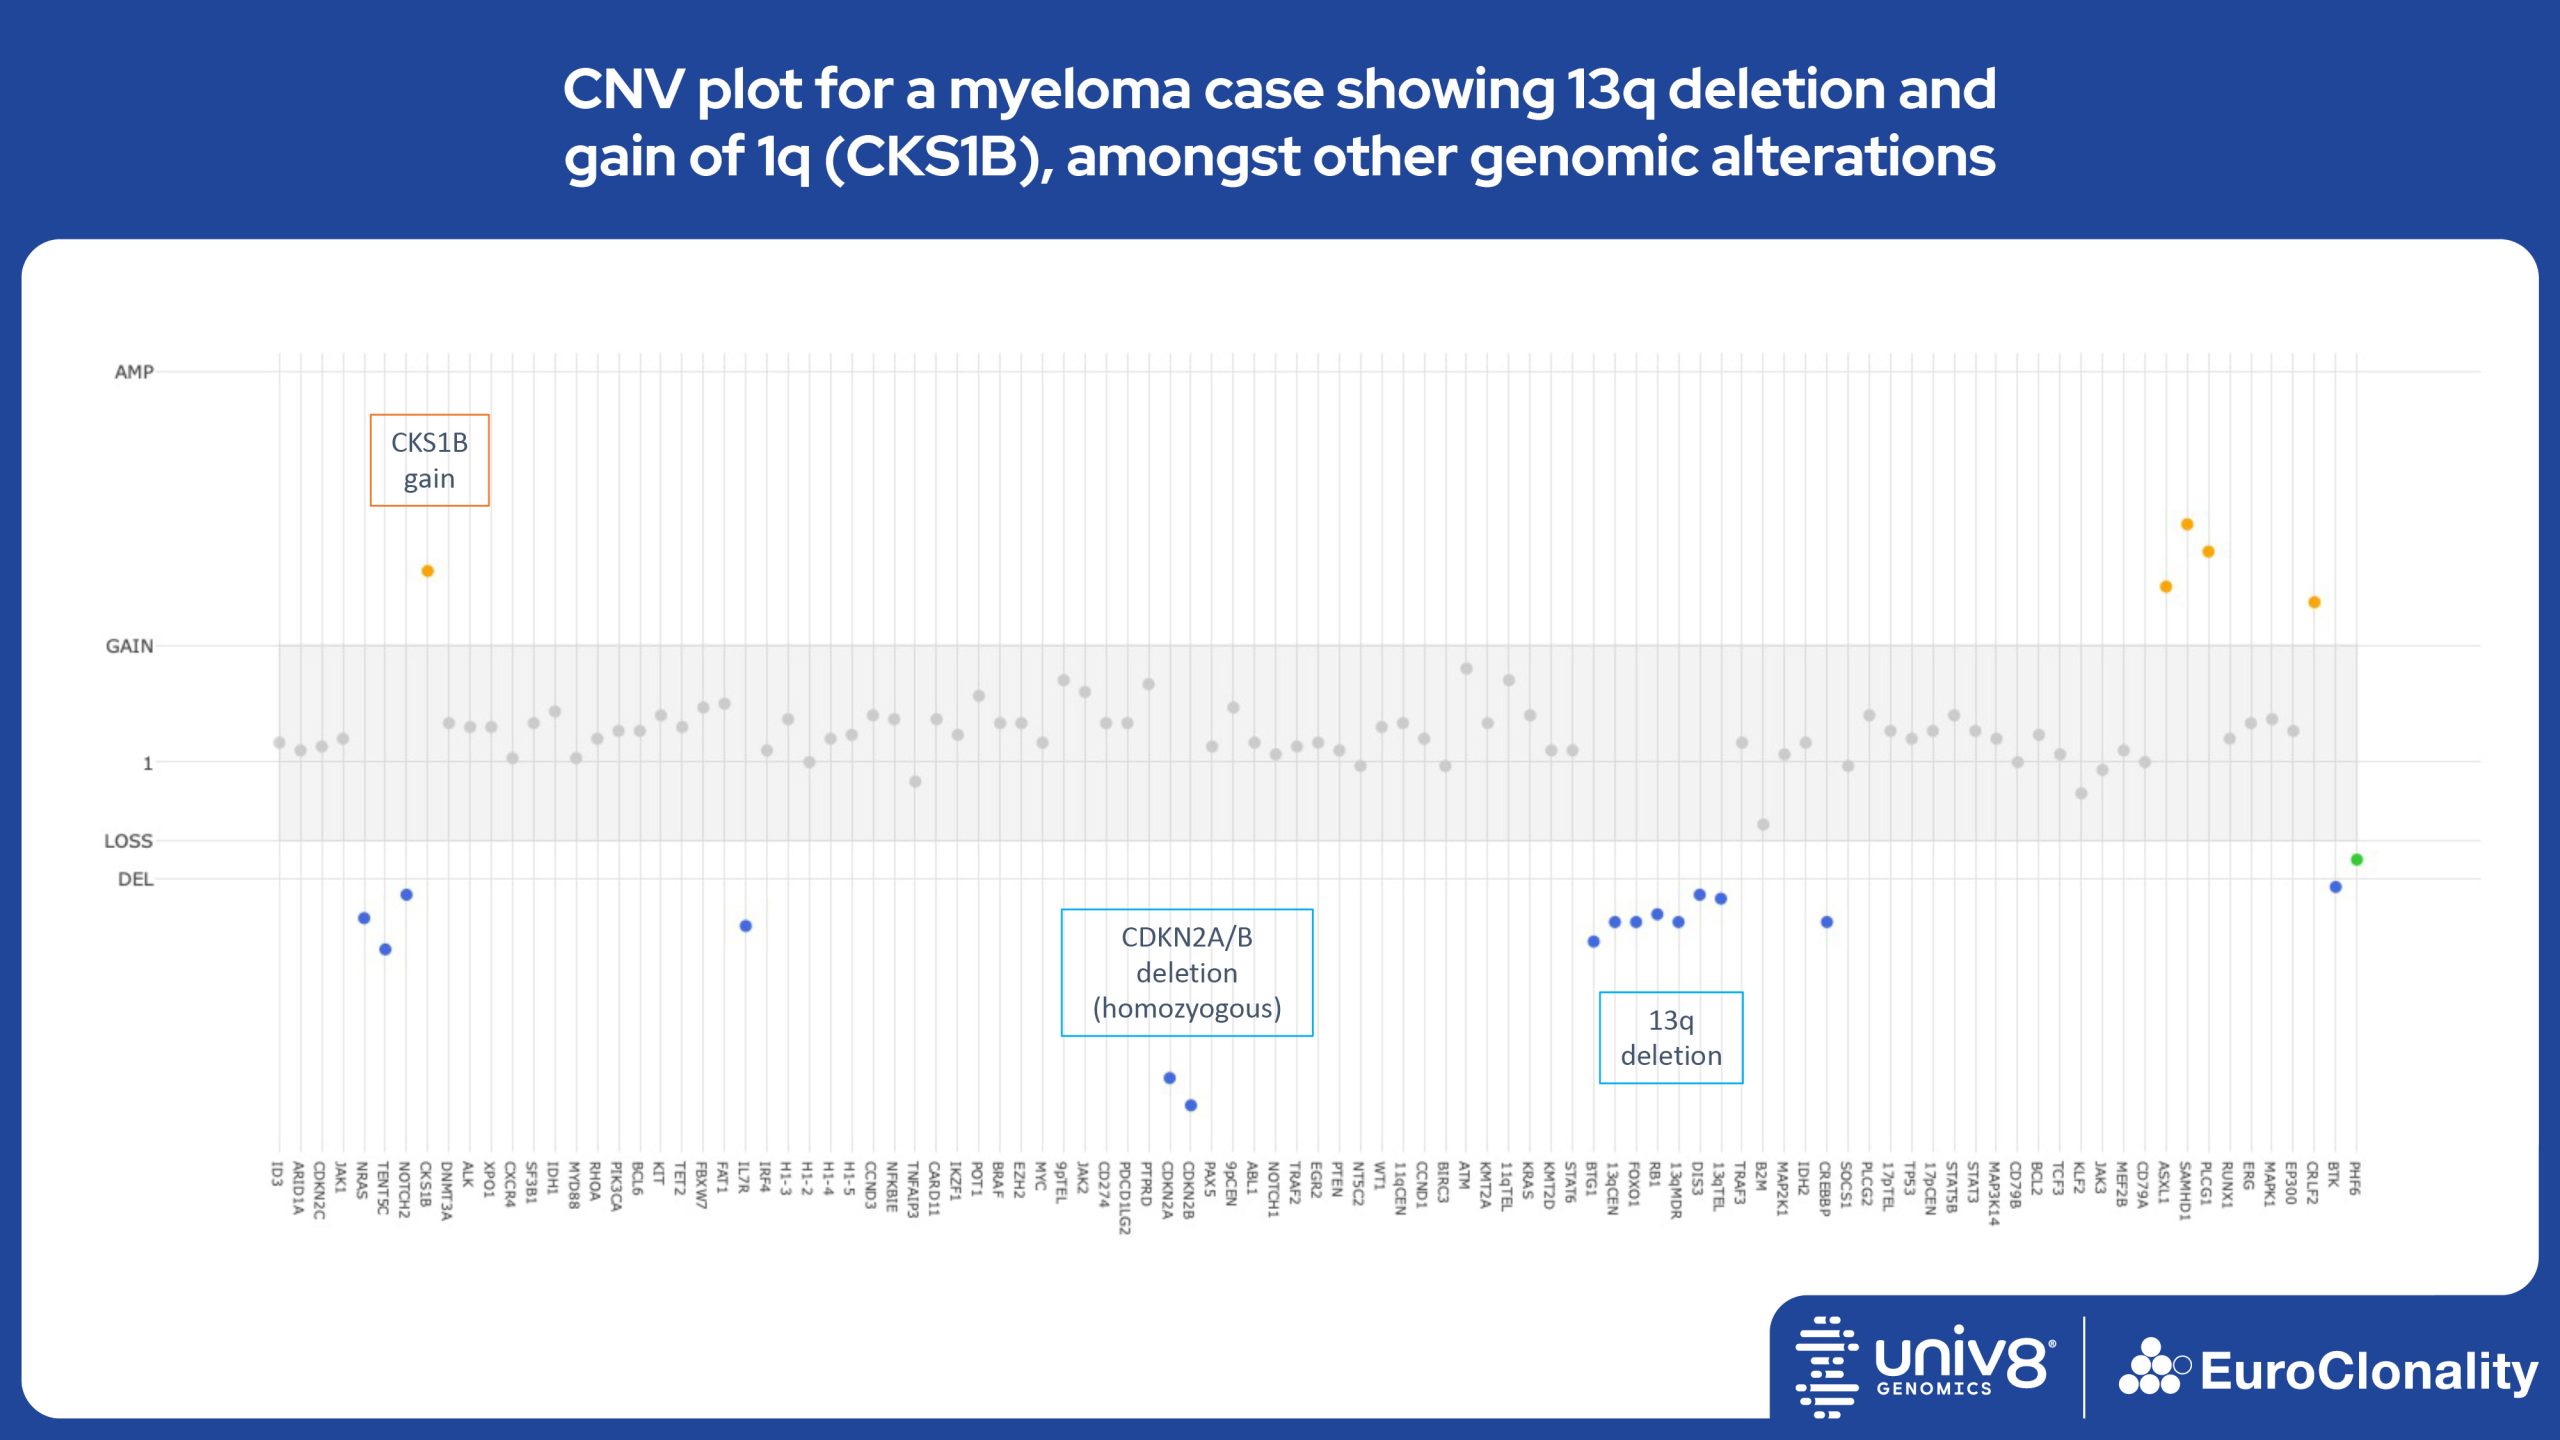 CNV plot for a myeloma case showing 13q deletion and gain of 1q (CKS1B), amongst other genomic alterations